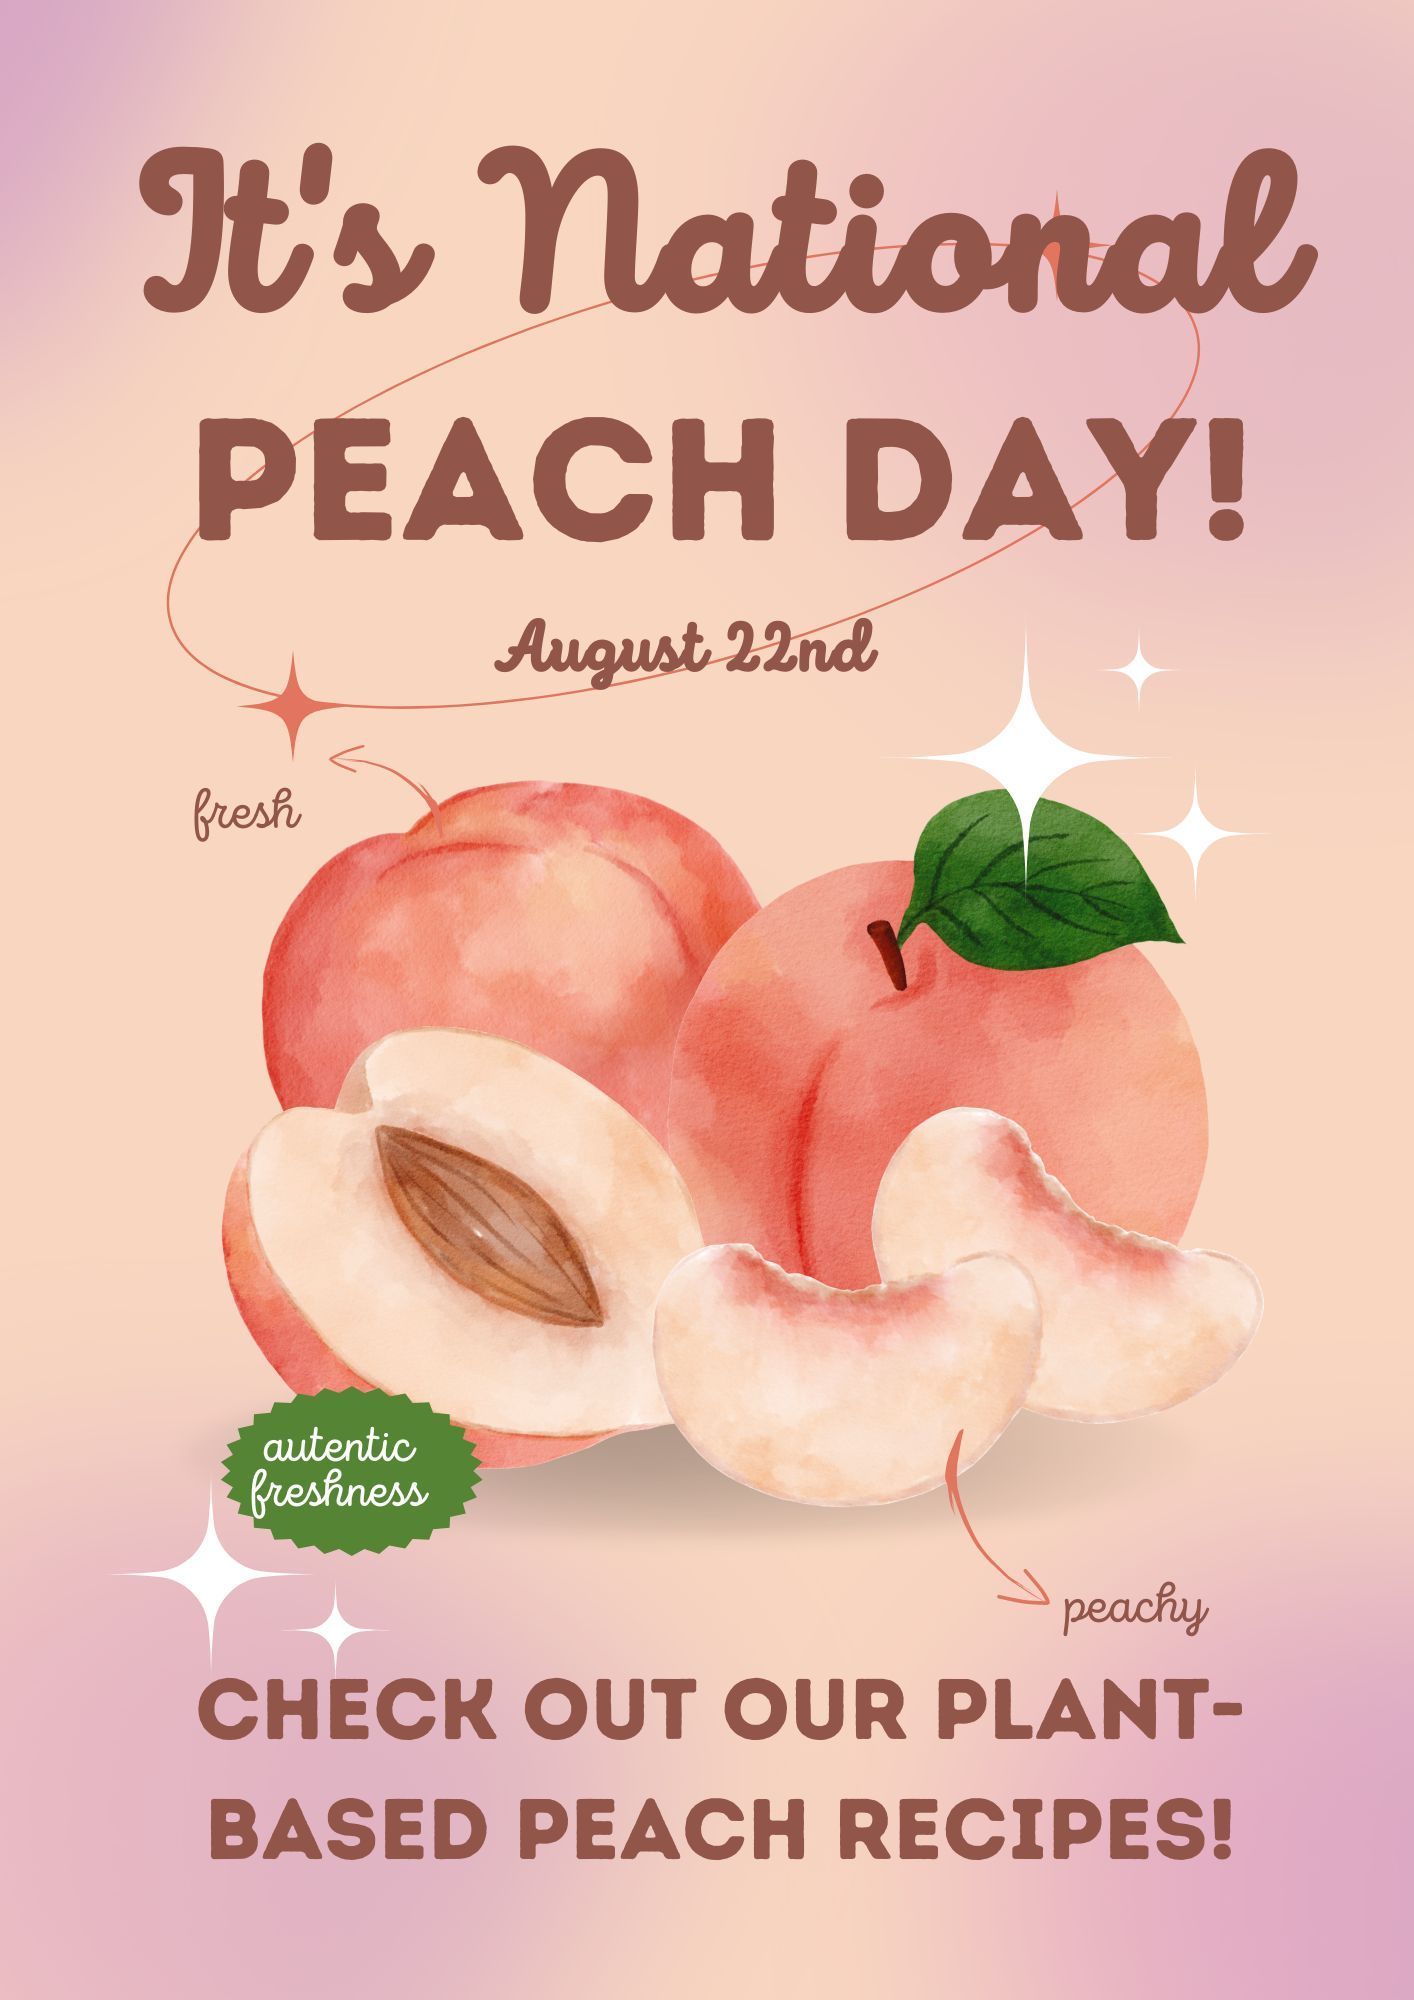 It's National Peach Day!